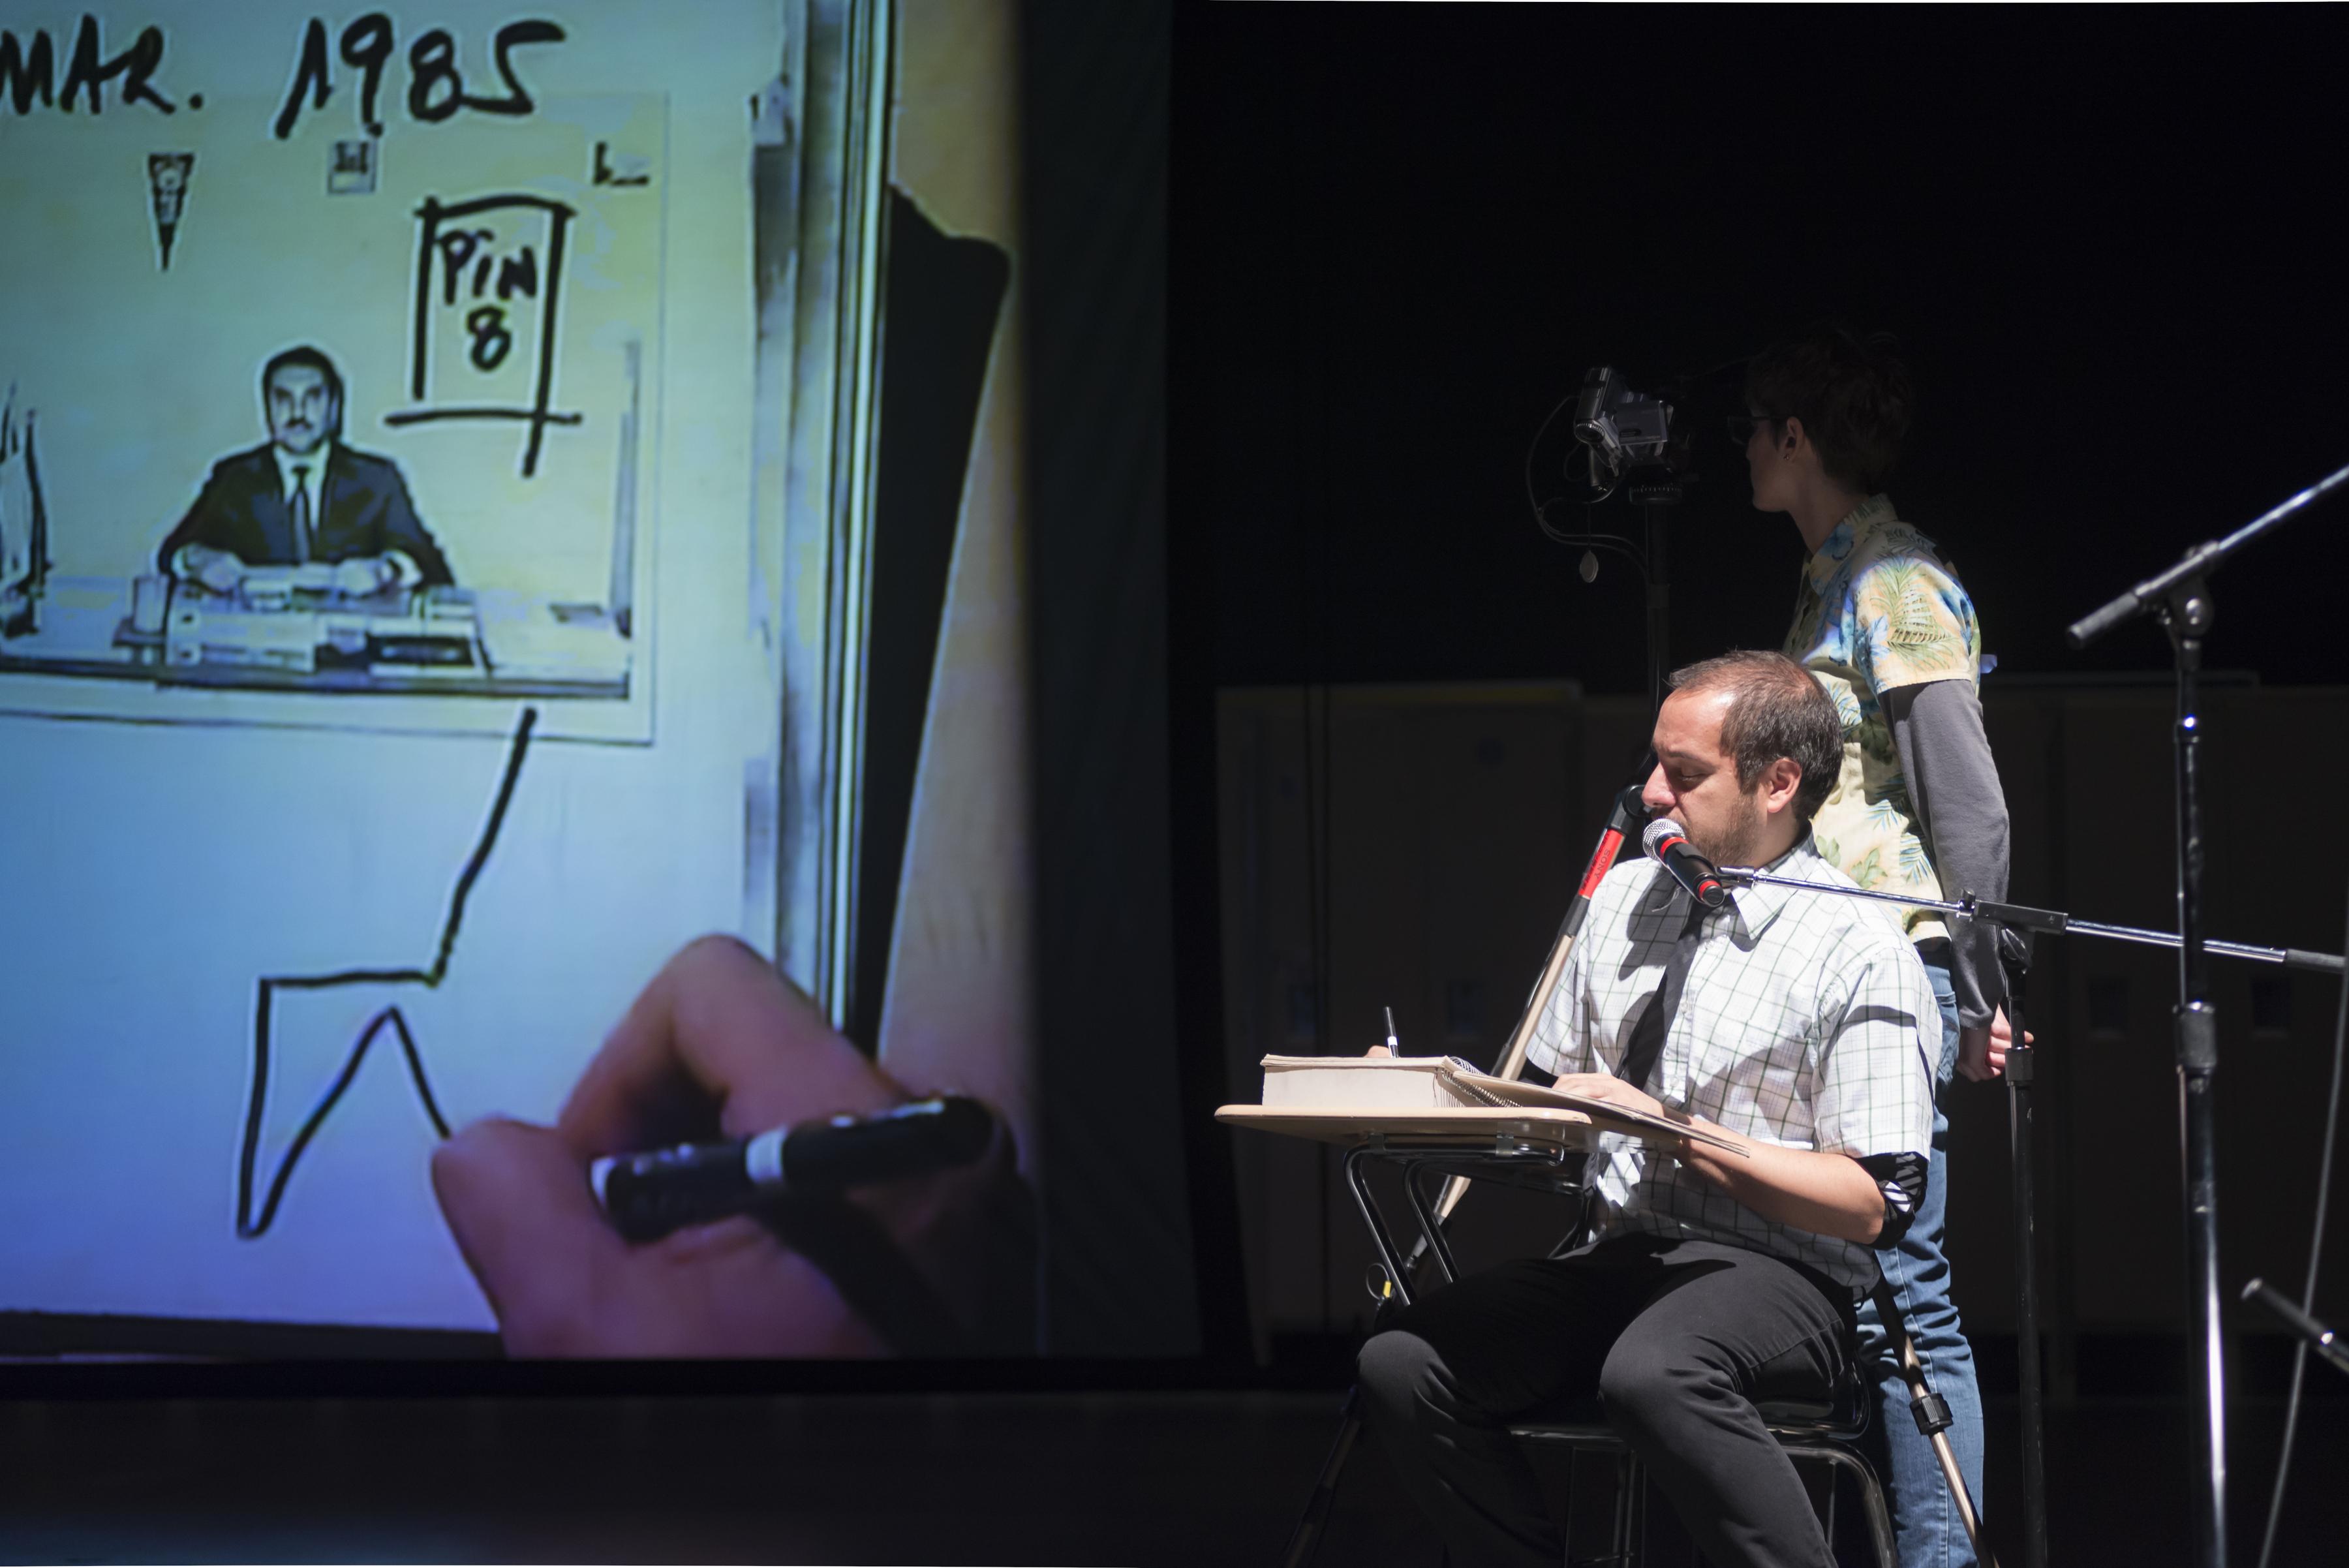 A performance still shows one actor watching a projection of what a seated actor draws at his desk.